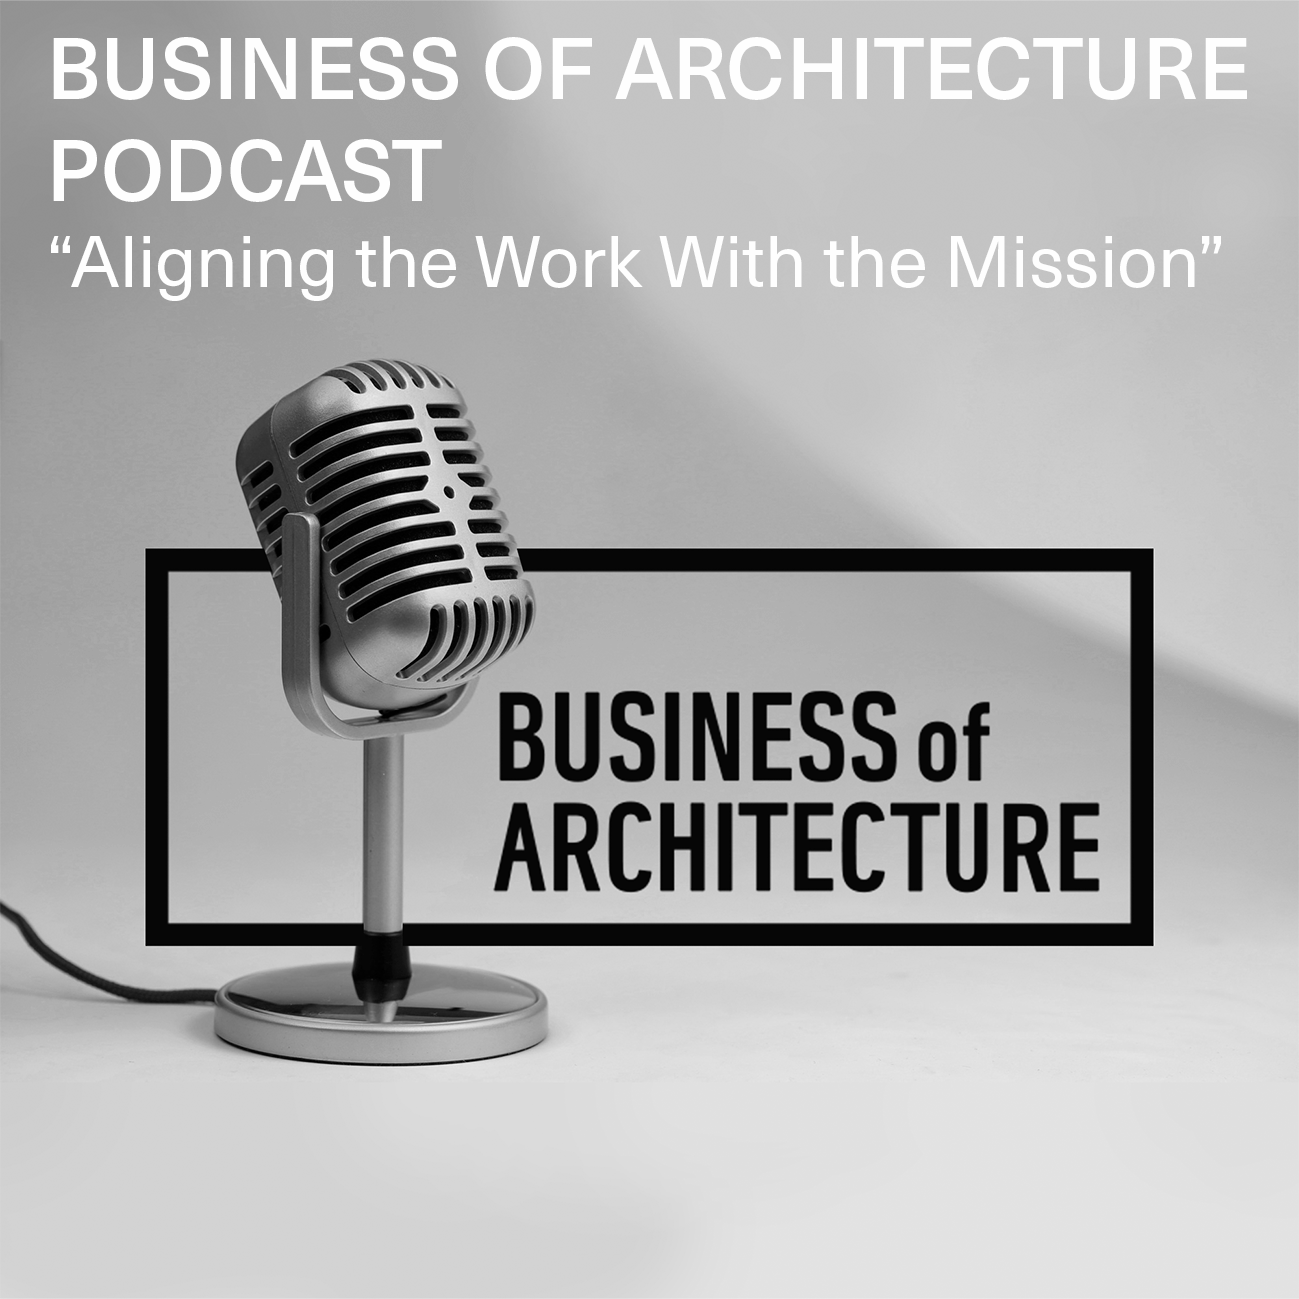 Podcast: Business of Architecture